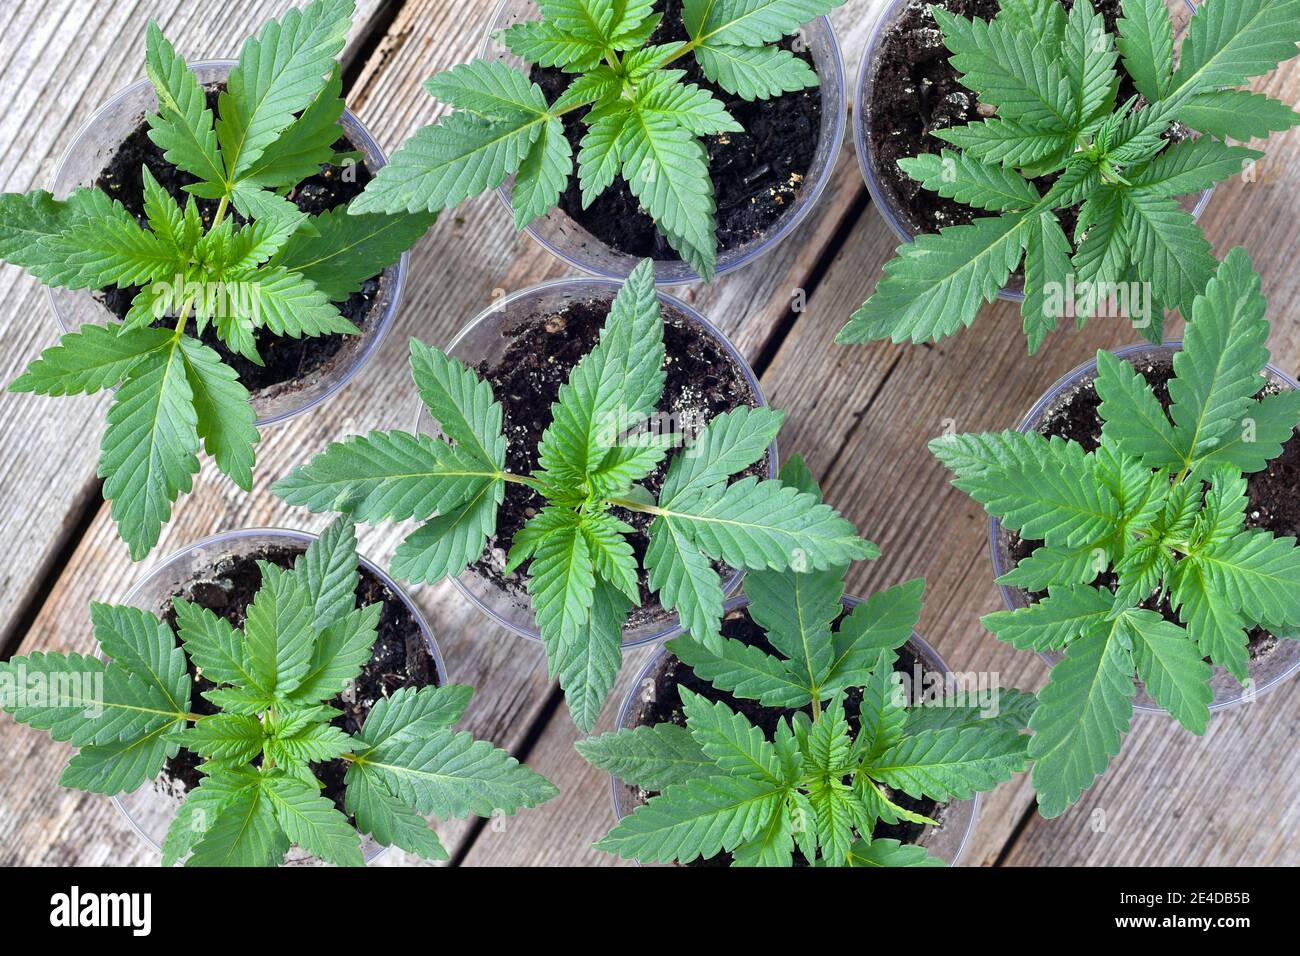 Young cannabis plant on a wooden table growing in a small growing pots Stock Photo